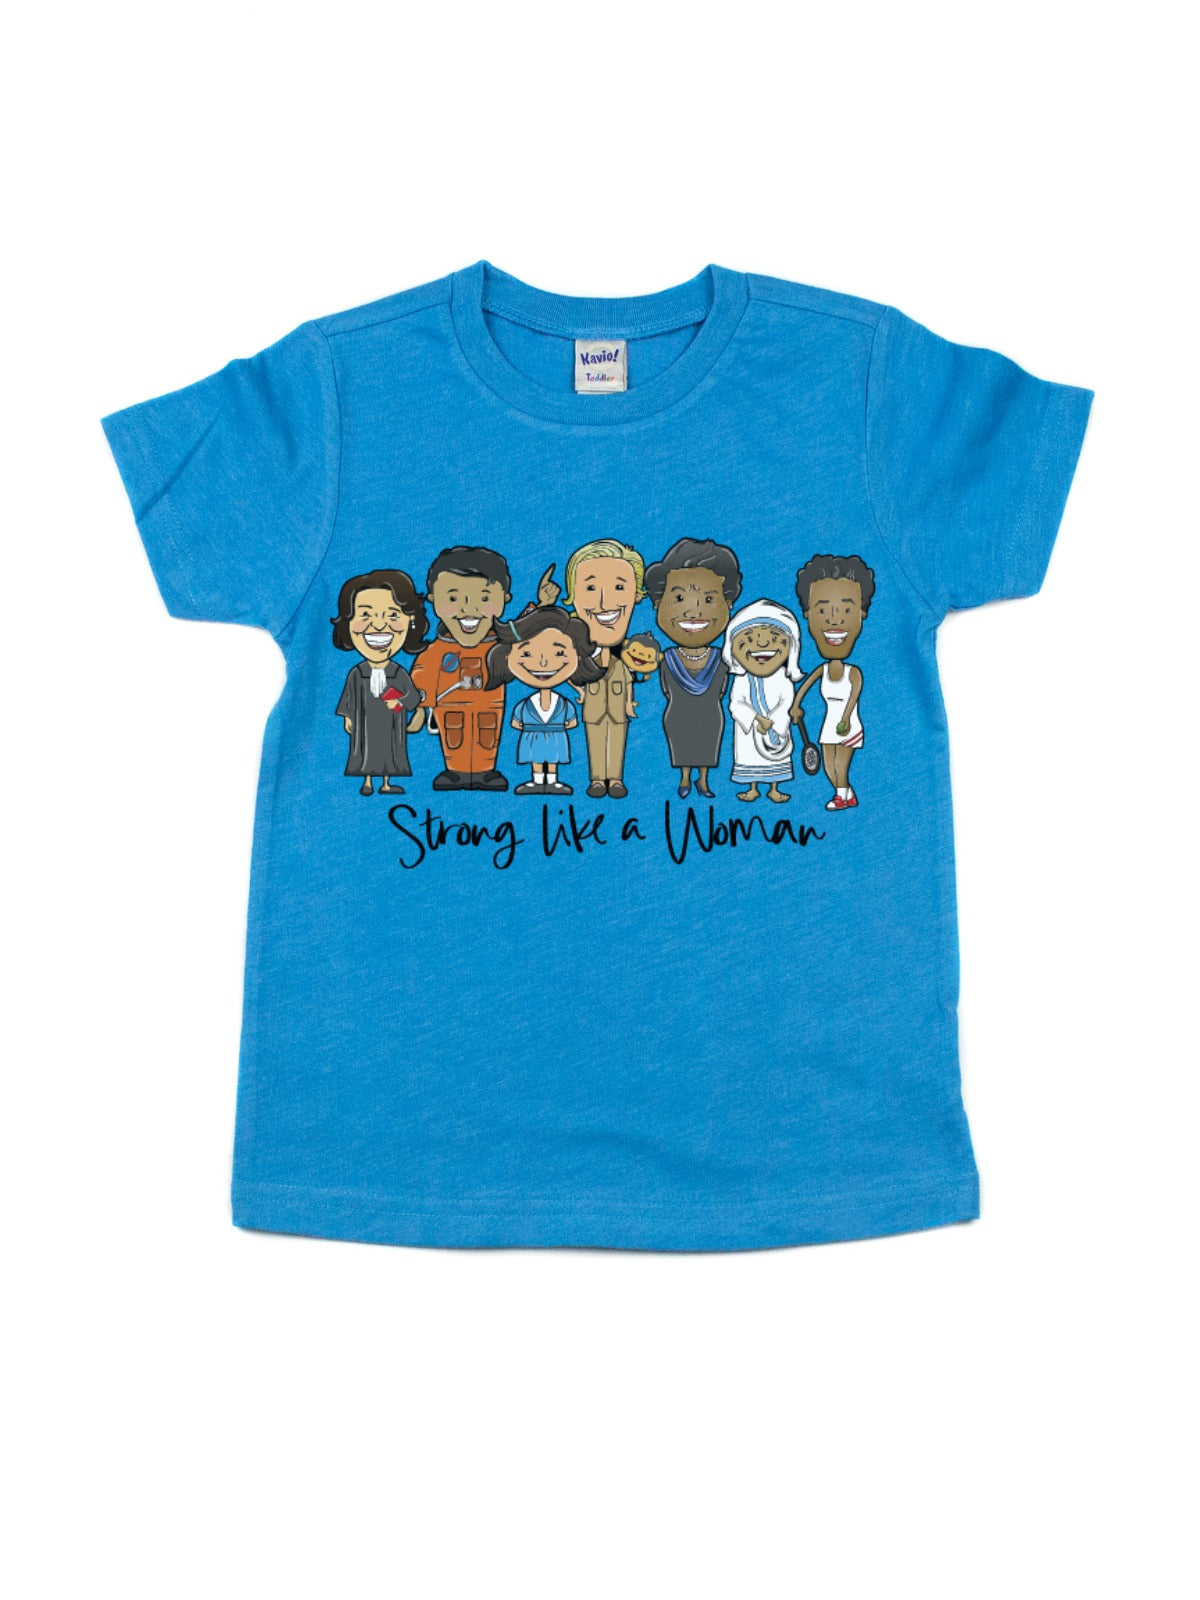 strong like a woman kids blue t-shirt for women's history month